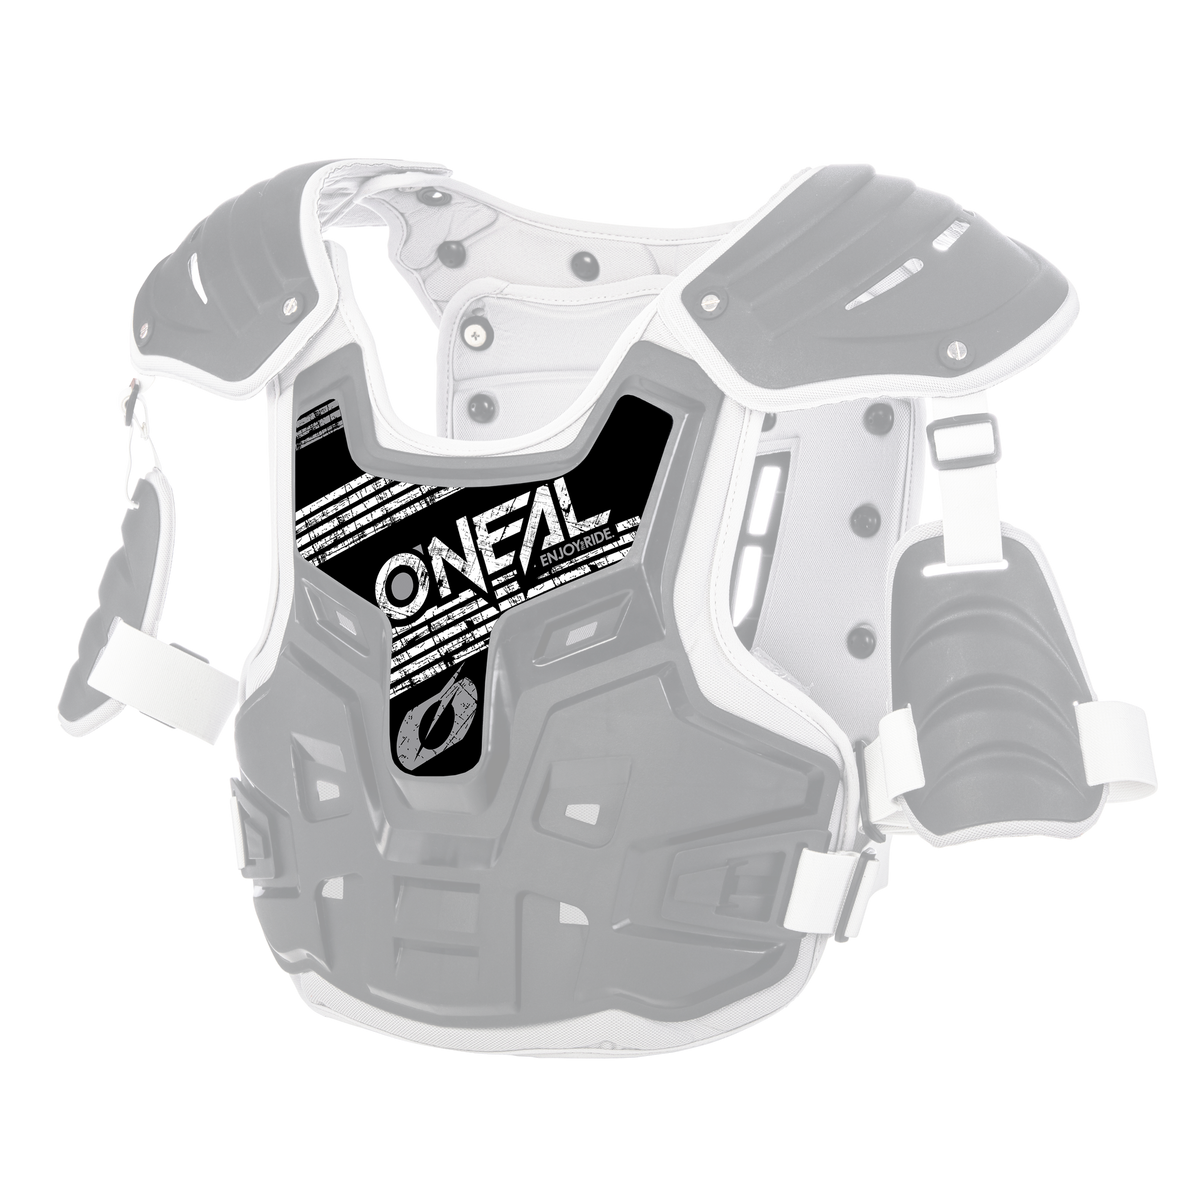 https://cdn.oneal.eu/assets/importedProductImages/PROTECTION/BODY%20ARMOUR/PXR%20STONE%20SHIELD/black_gray/2018_ONeal_PXR_StoneShield_black_gray_Sticker.png